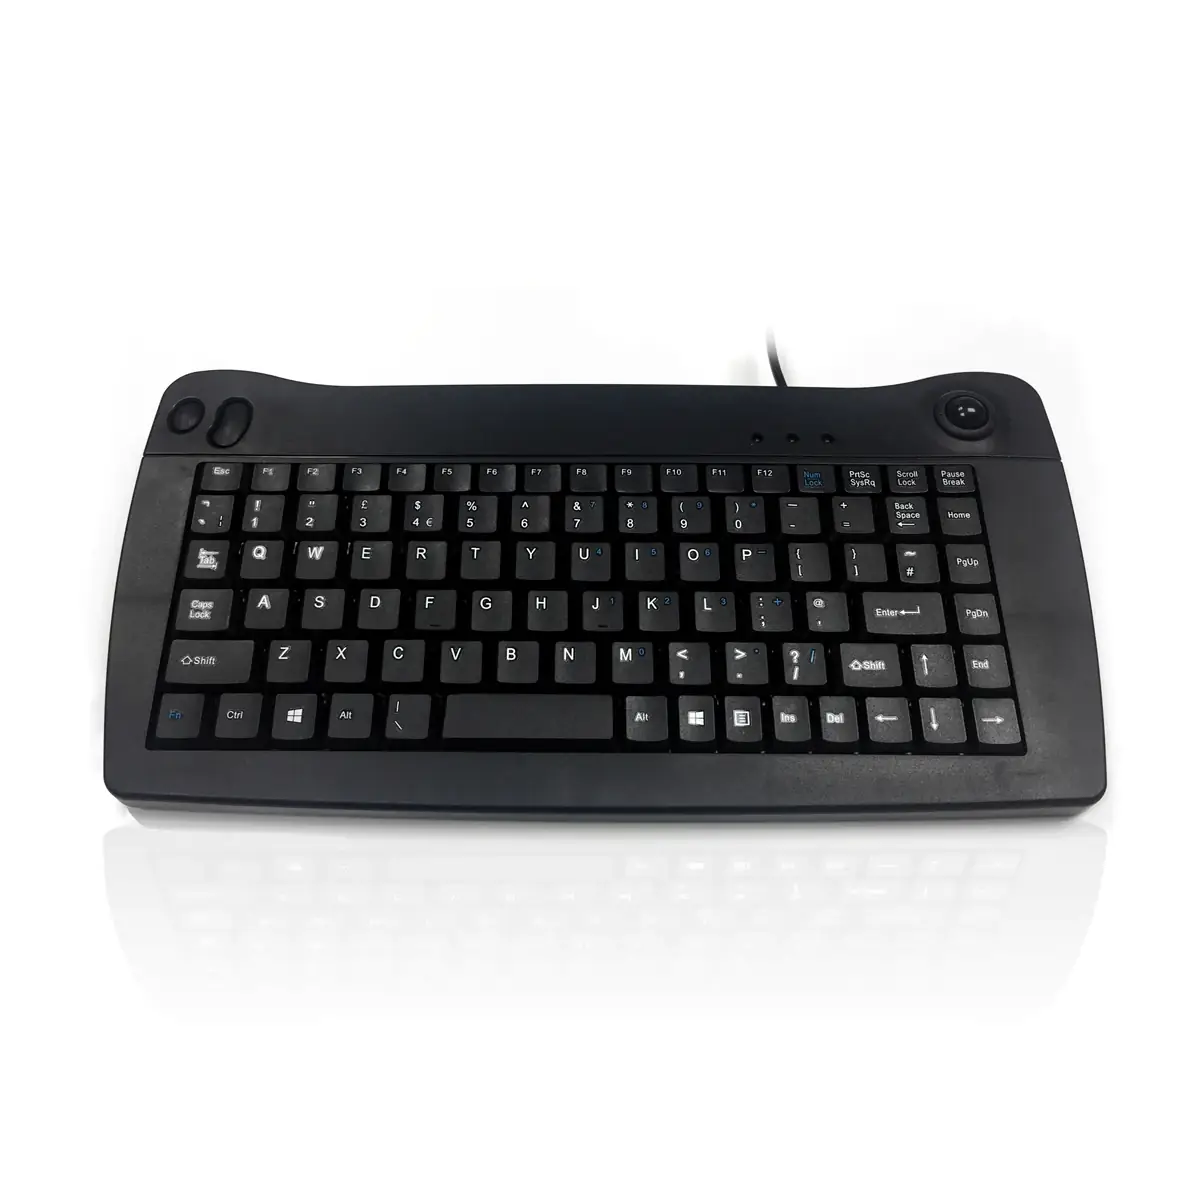 Ceratech Accuratus 5010 Keyboard with Trackball